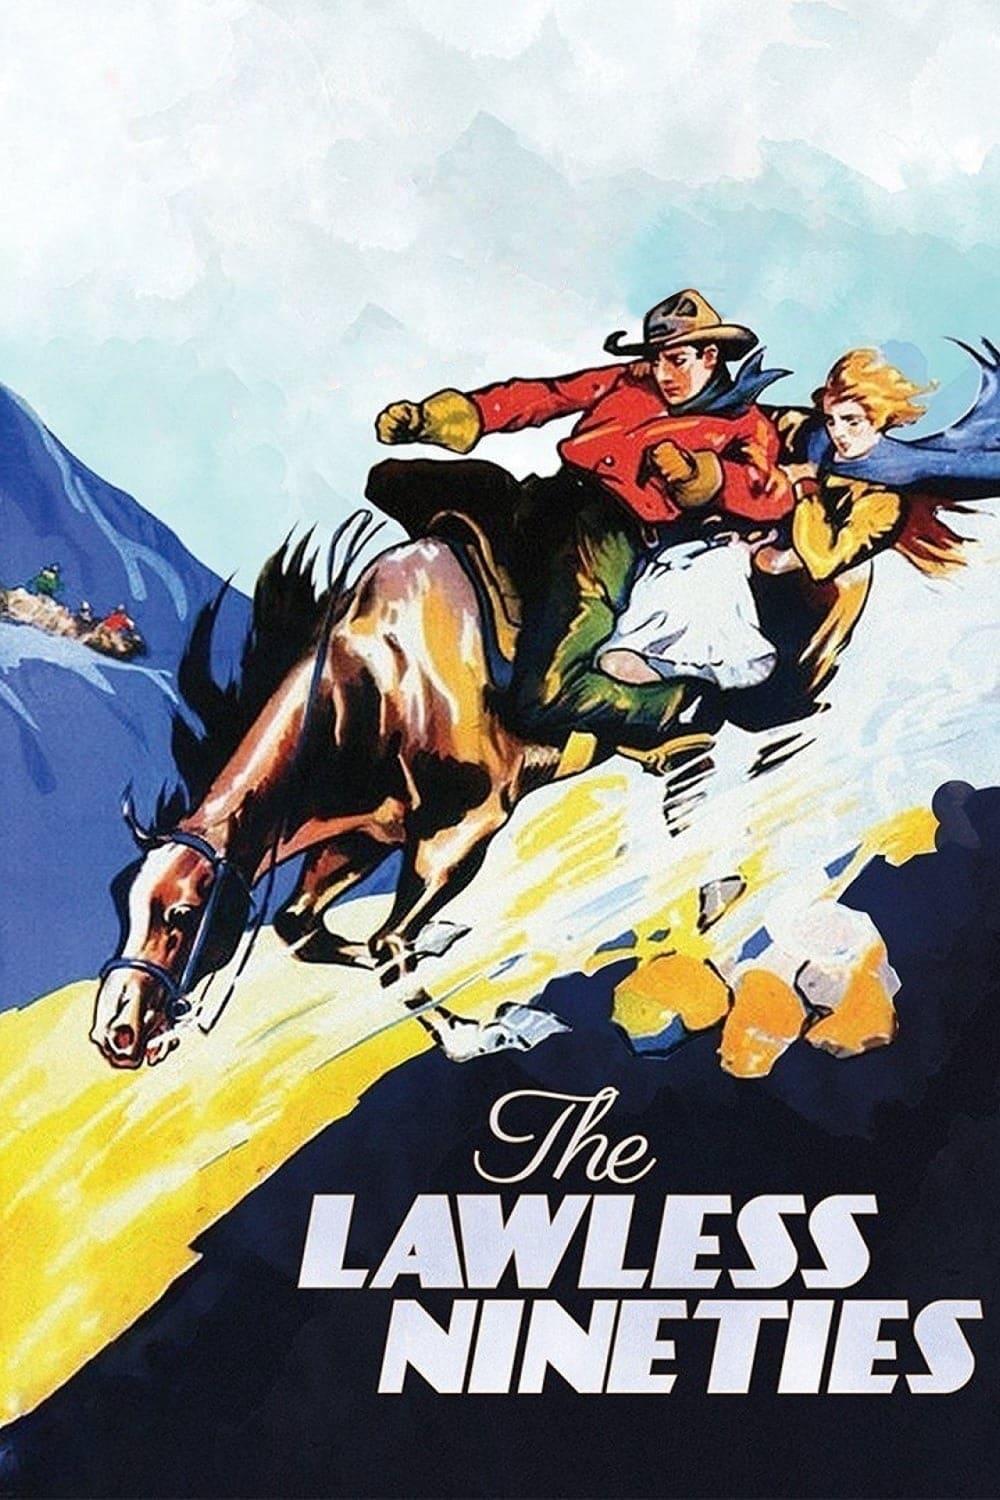 The Lawless Nineties poster